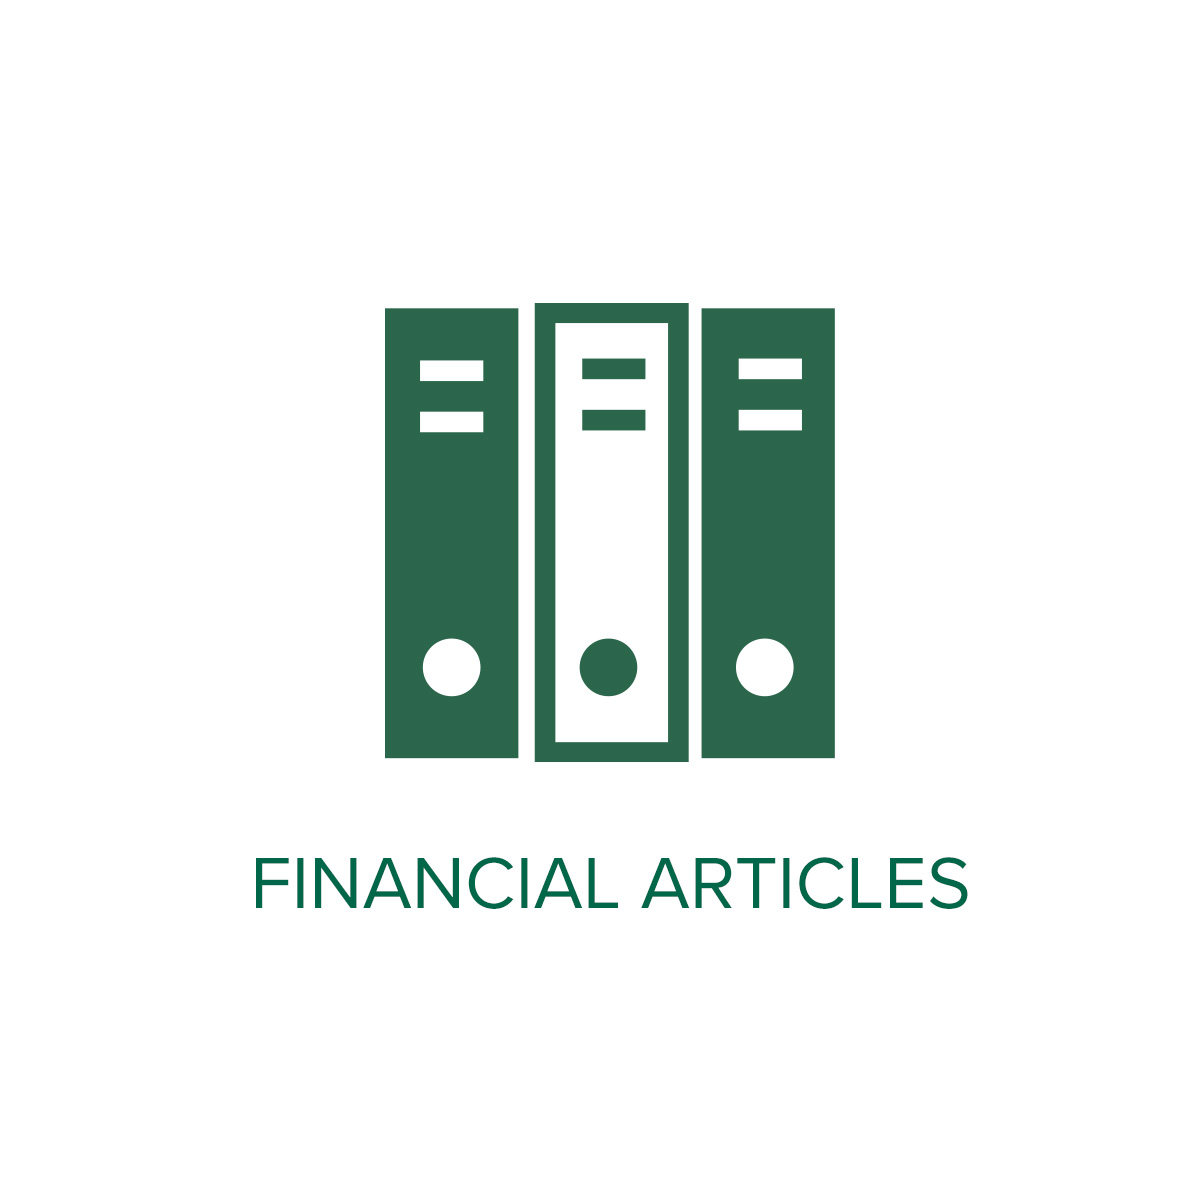 Financial articles icon